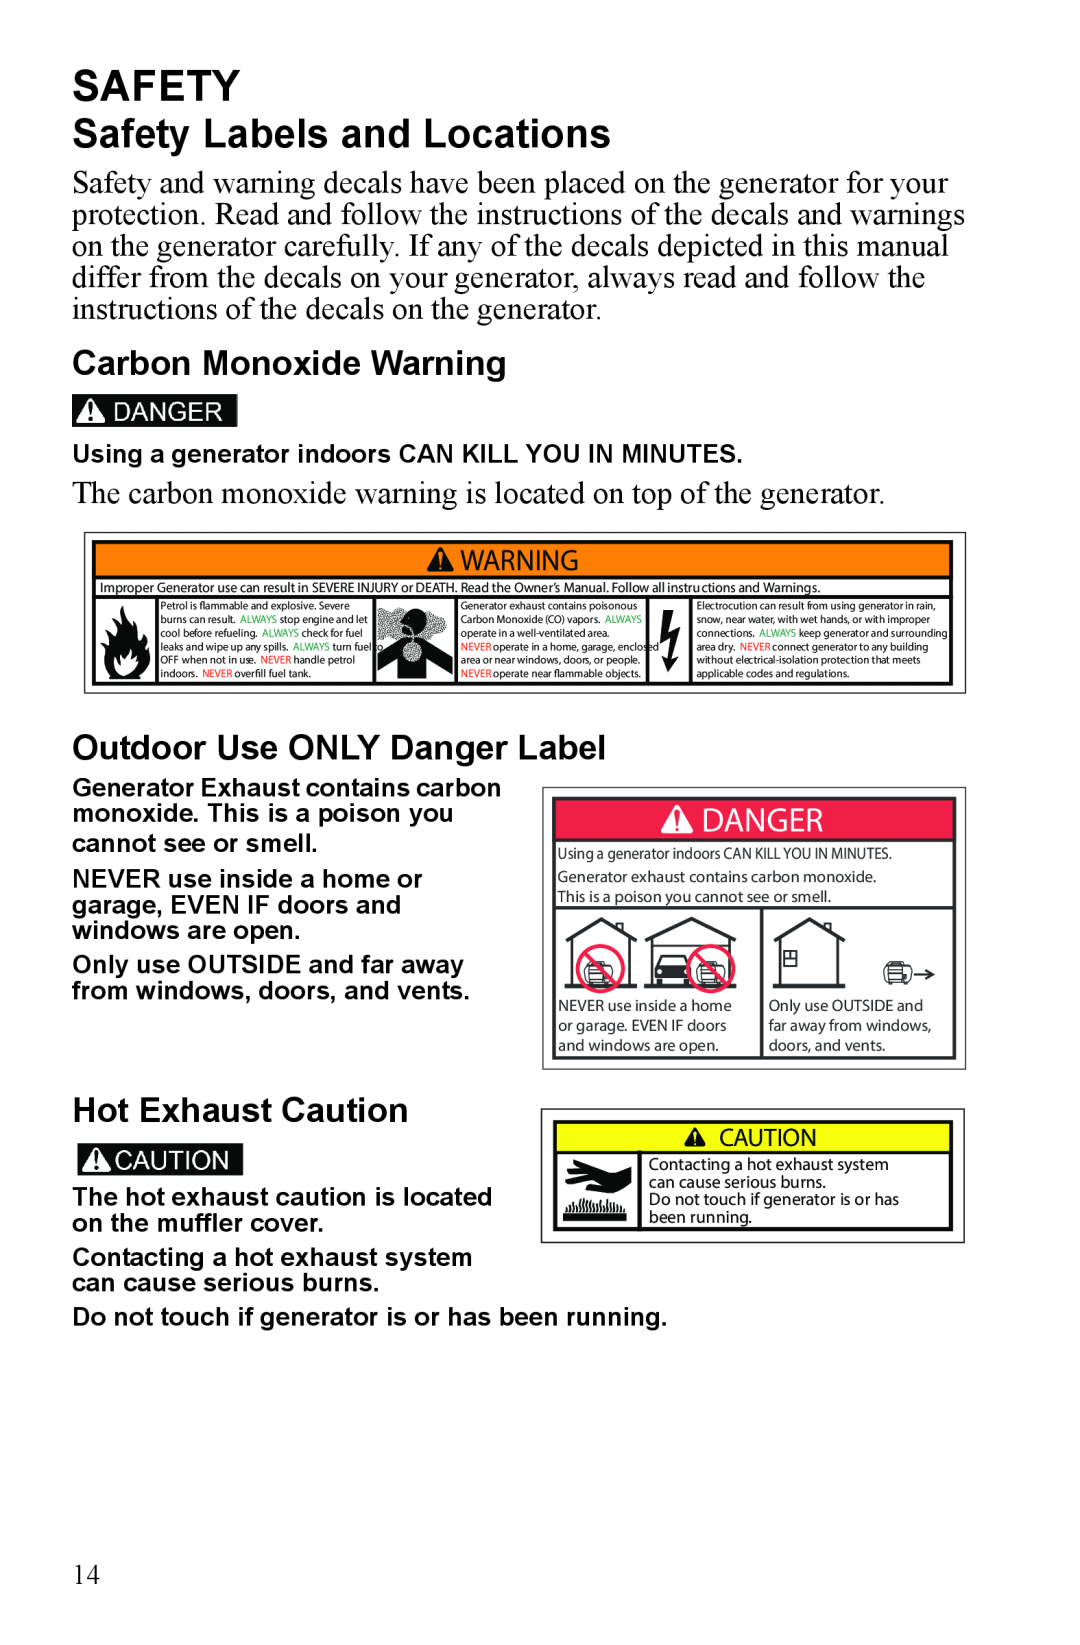 Polaris P3000iE manual Safety, Carbon Monoxide Warning, Outdoor Use ONLY Danger Label, Hot Exhaust Caution 